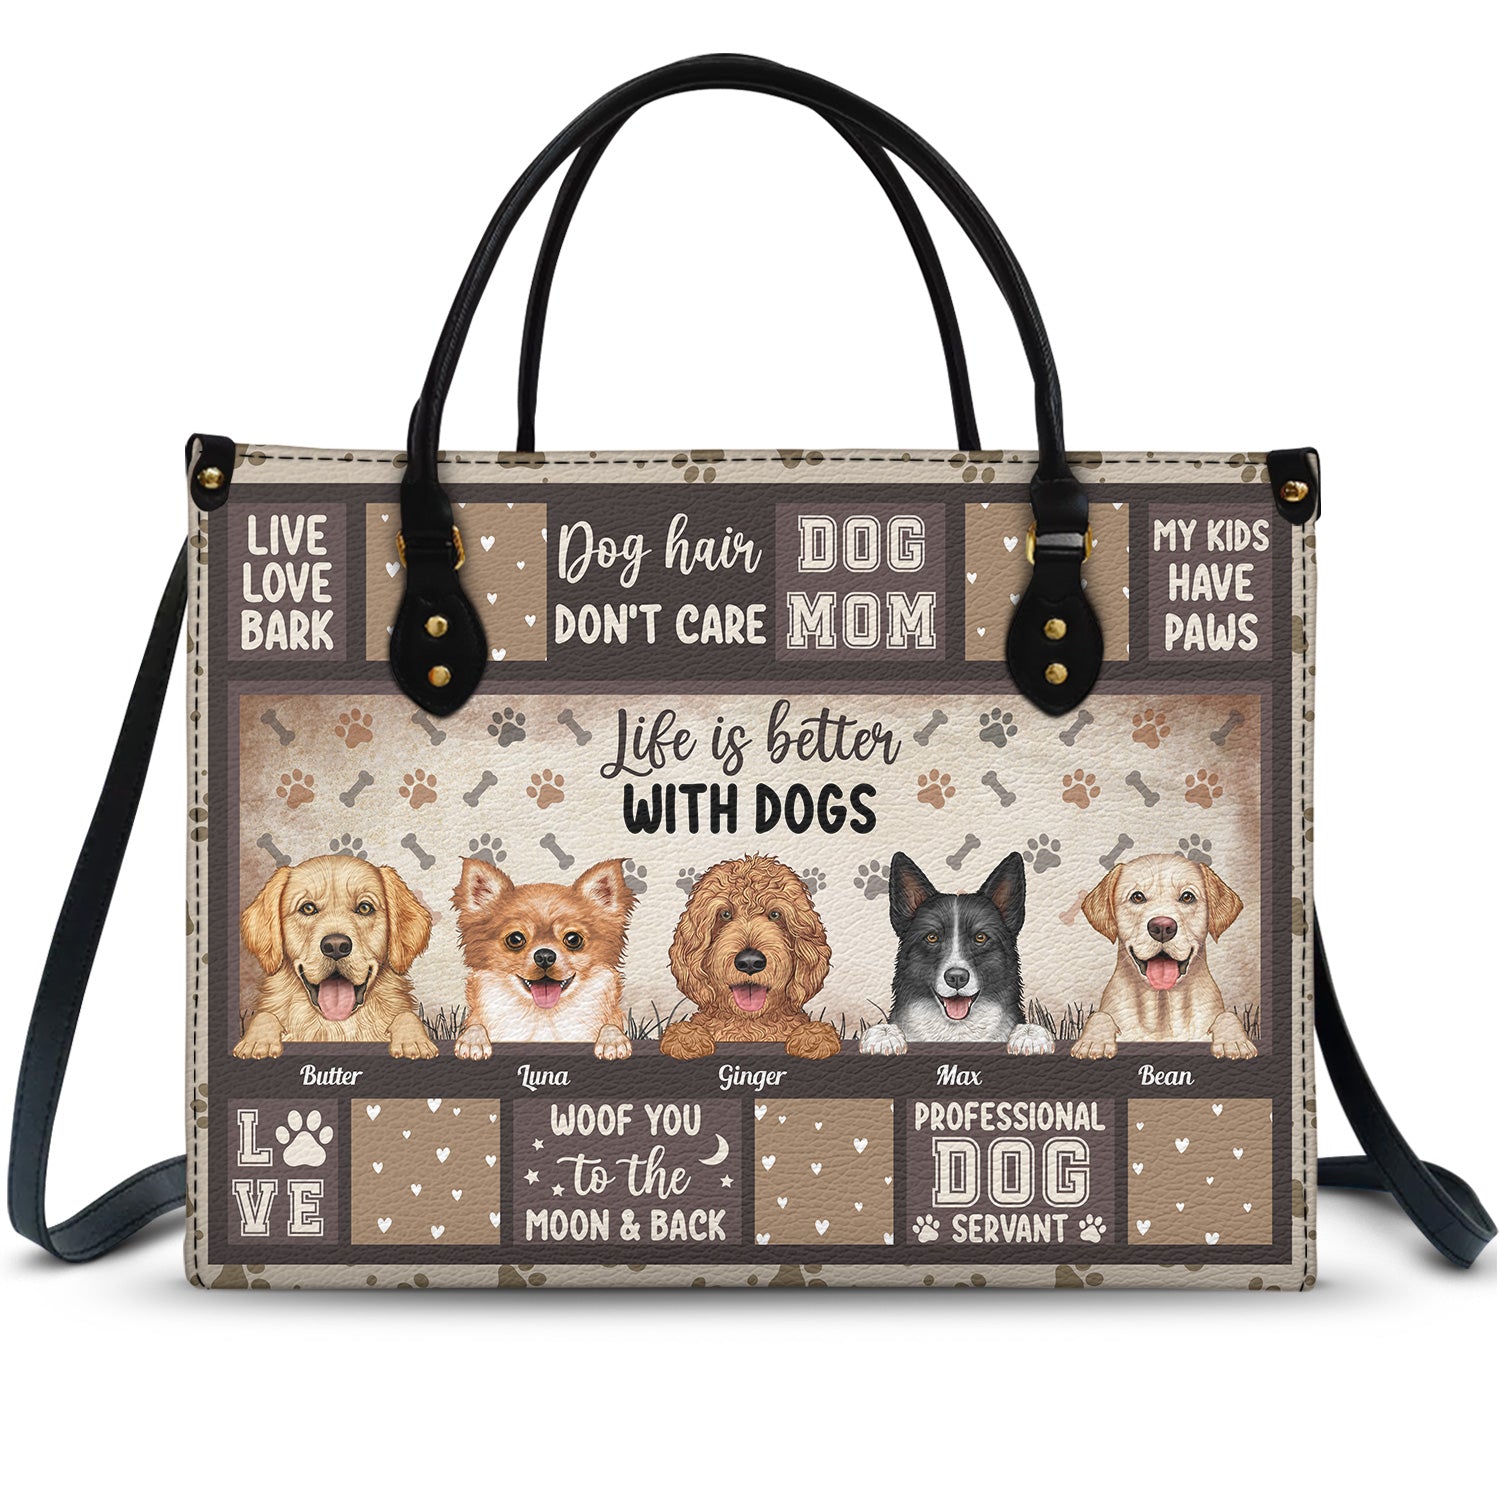 Life Is Better With Dogs - Gift For Dog Lovers, Dog Mom - Personalized Leather Bag